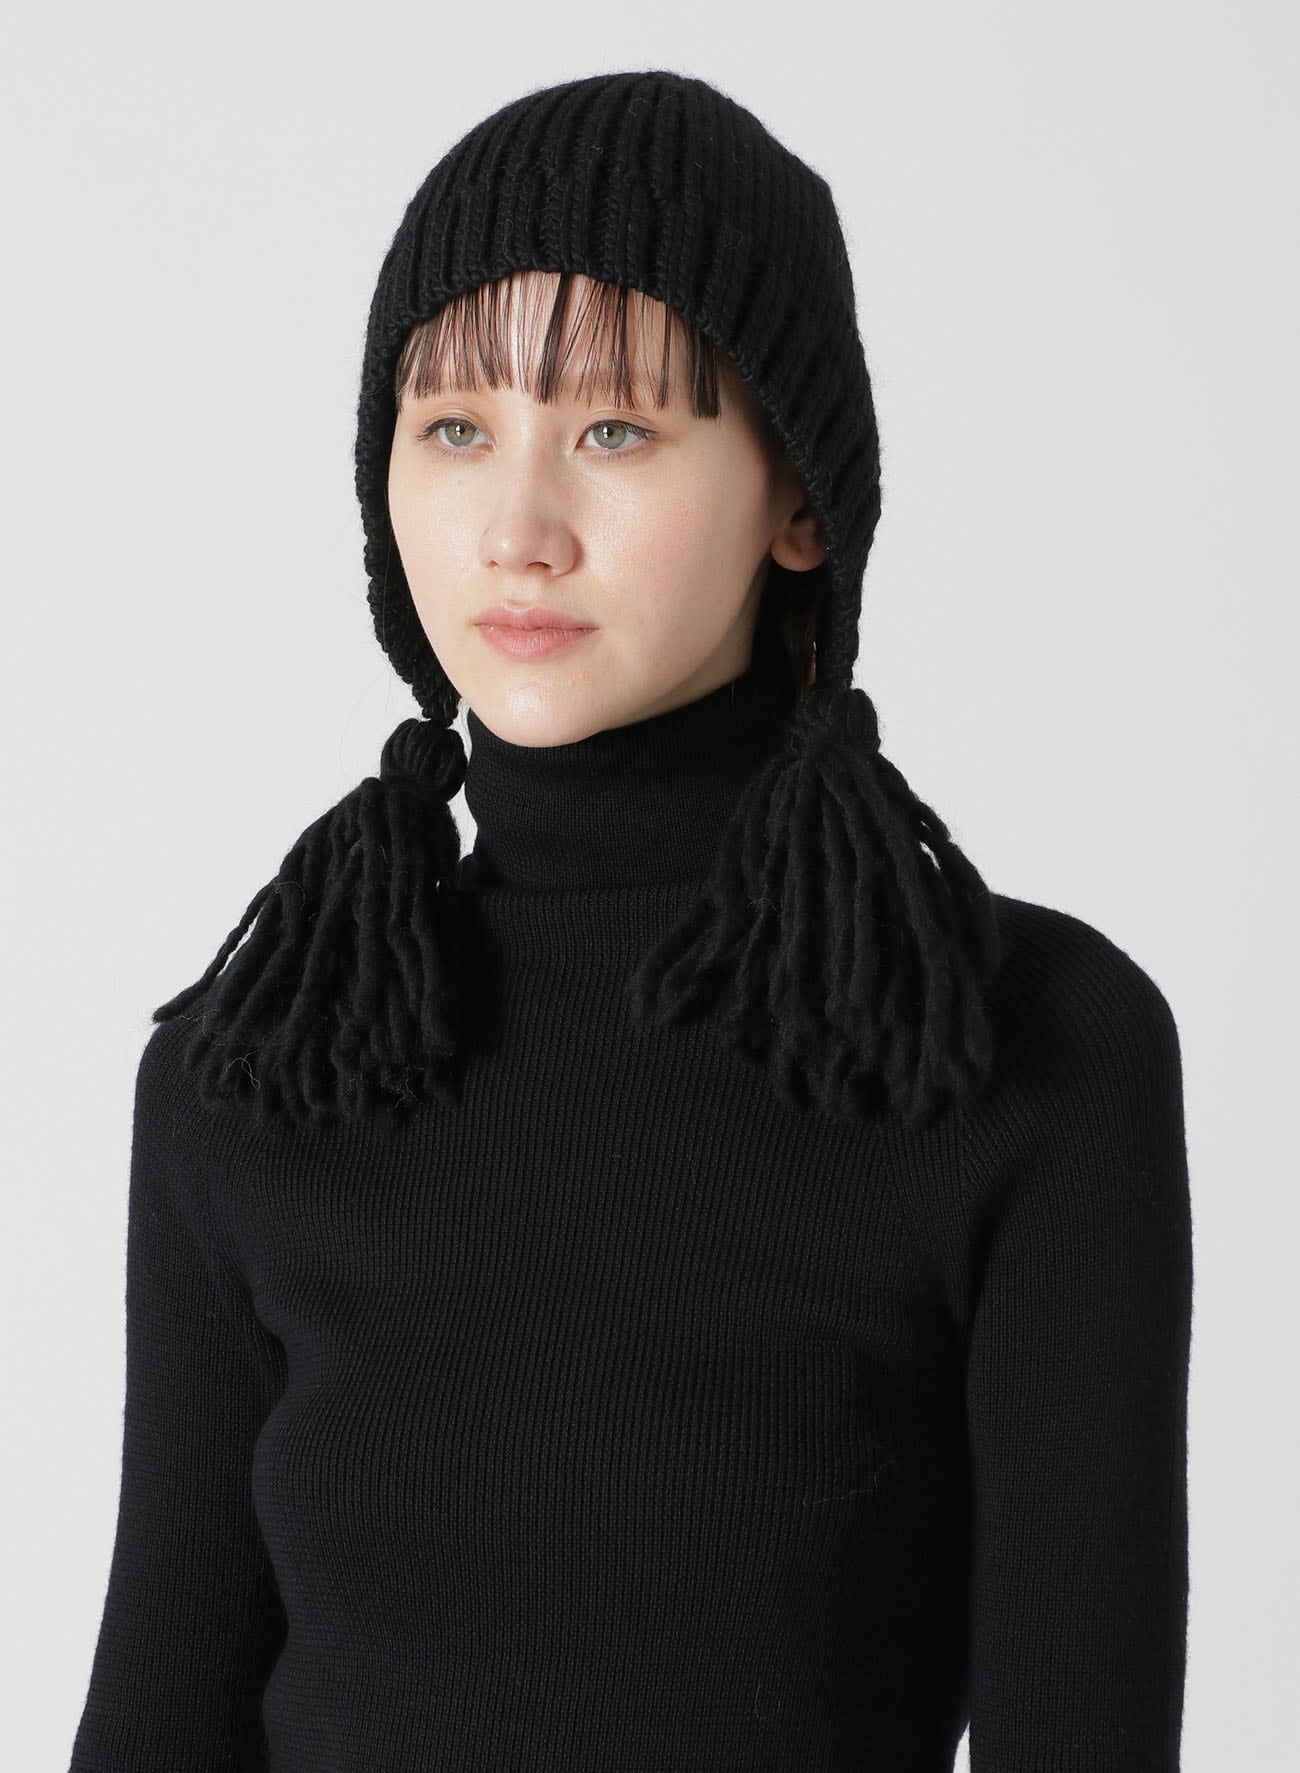 KNITTED WOOL JERSEY HAT WITH TASSELS(FREE SIZE Black): LIMI feu